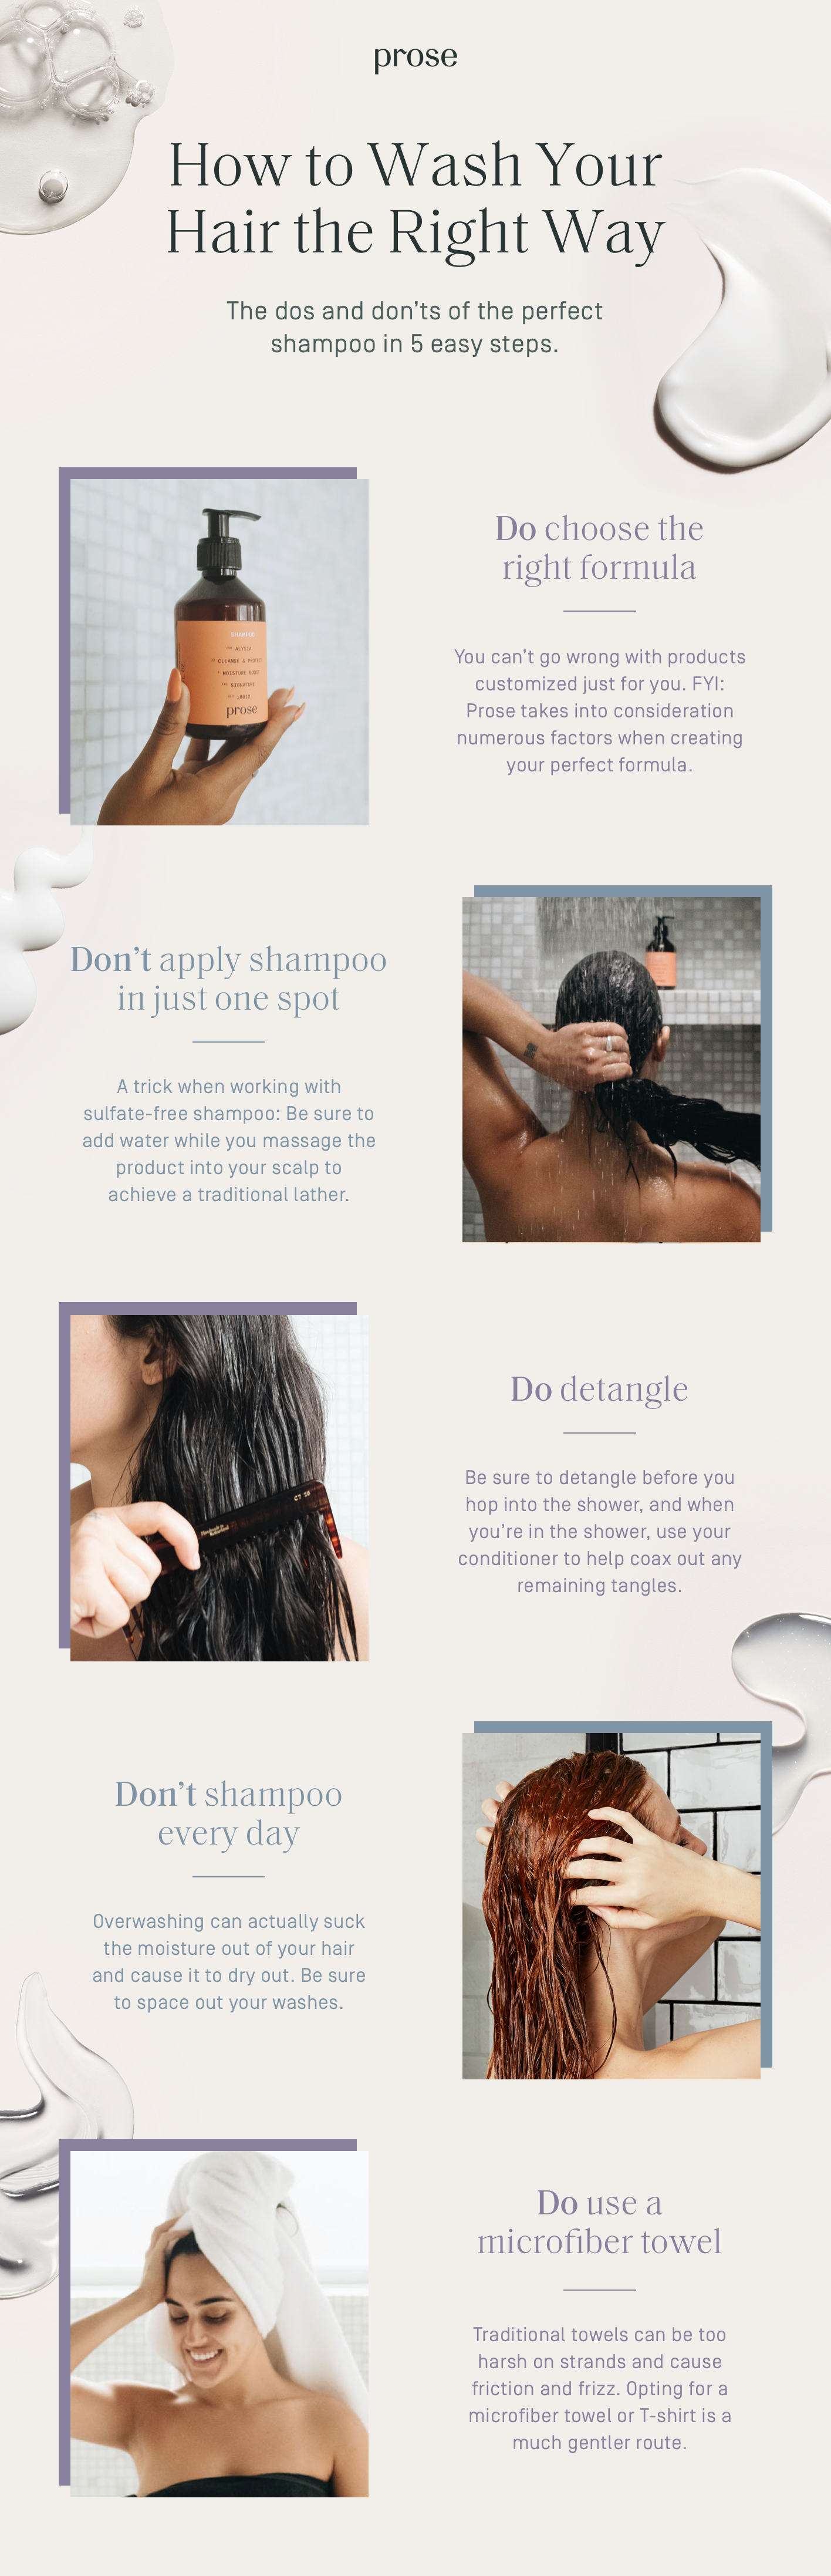 How to Wash Your Hair the Right Way | Hair Washing Tips